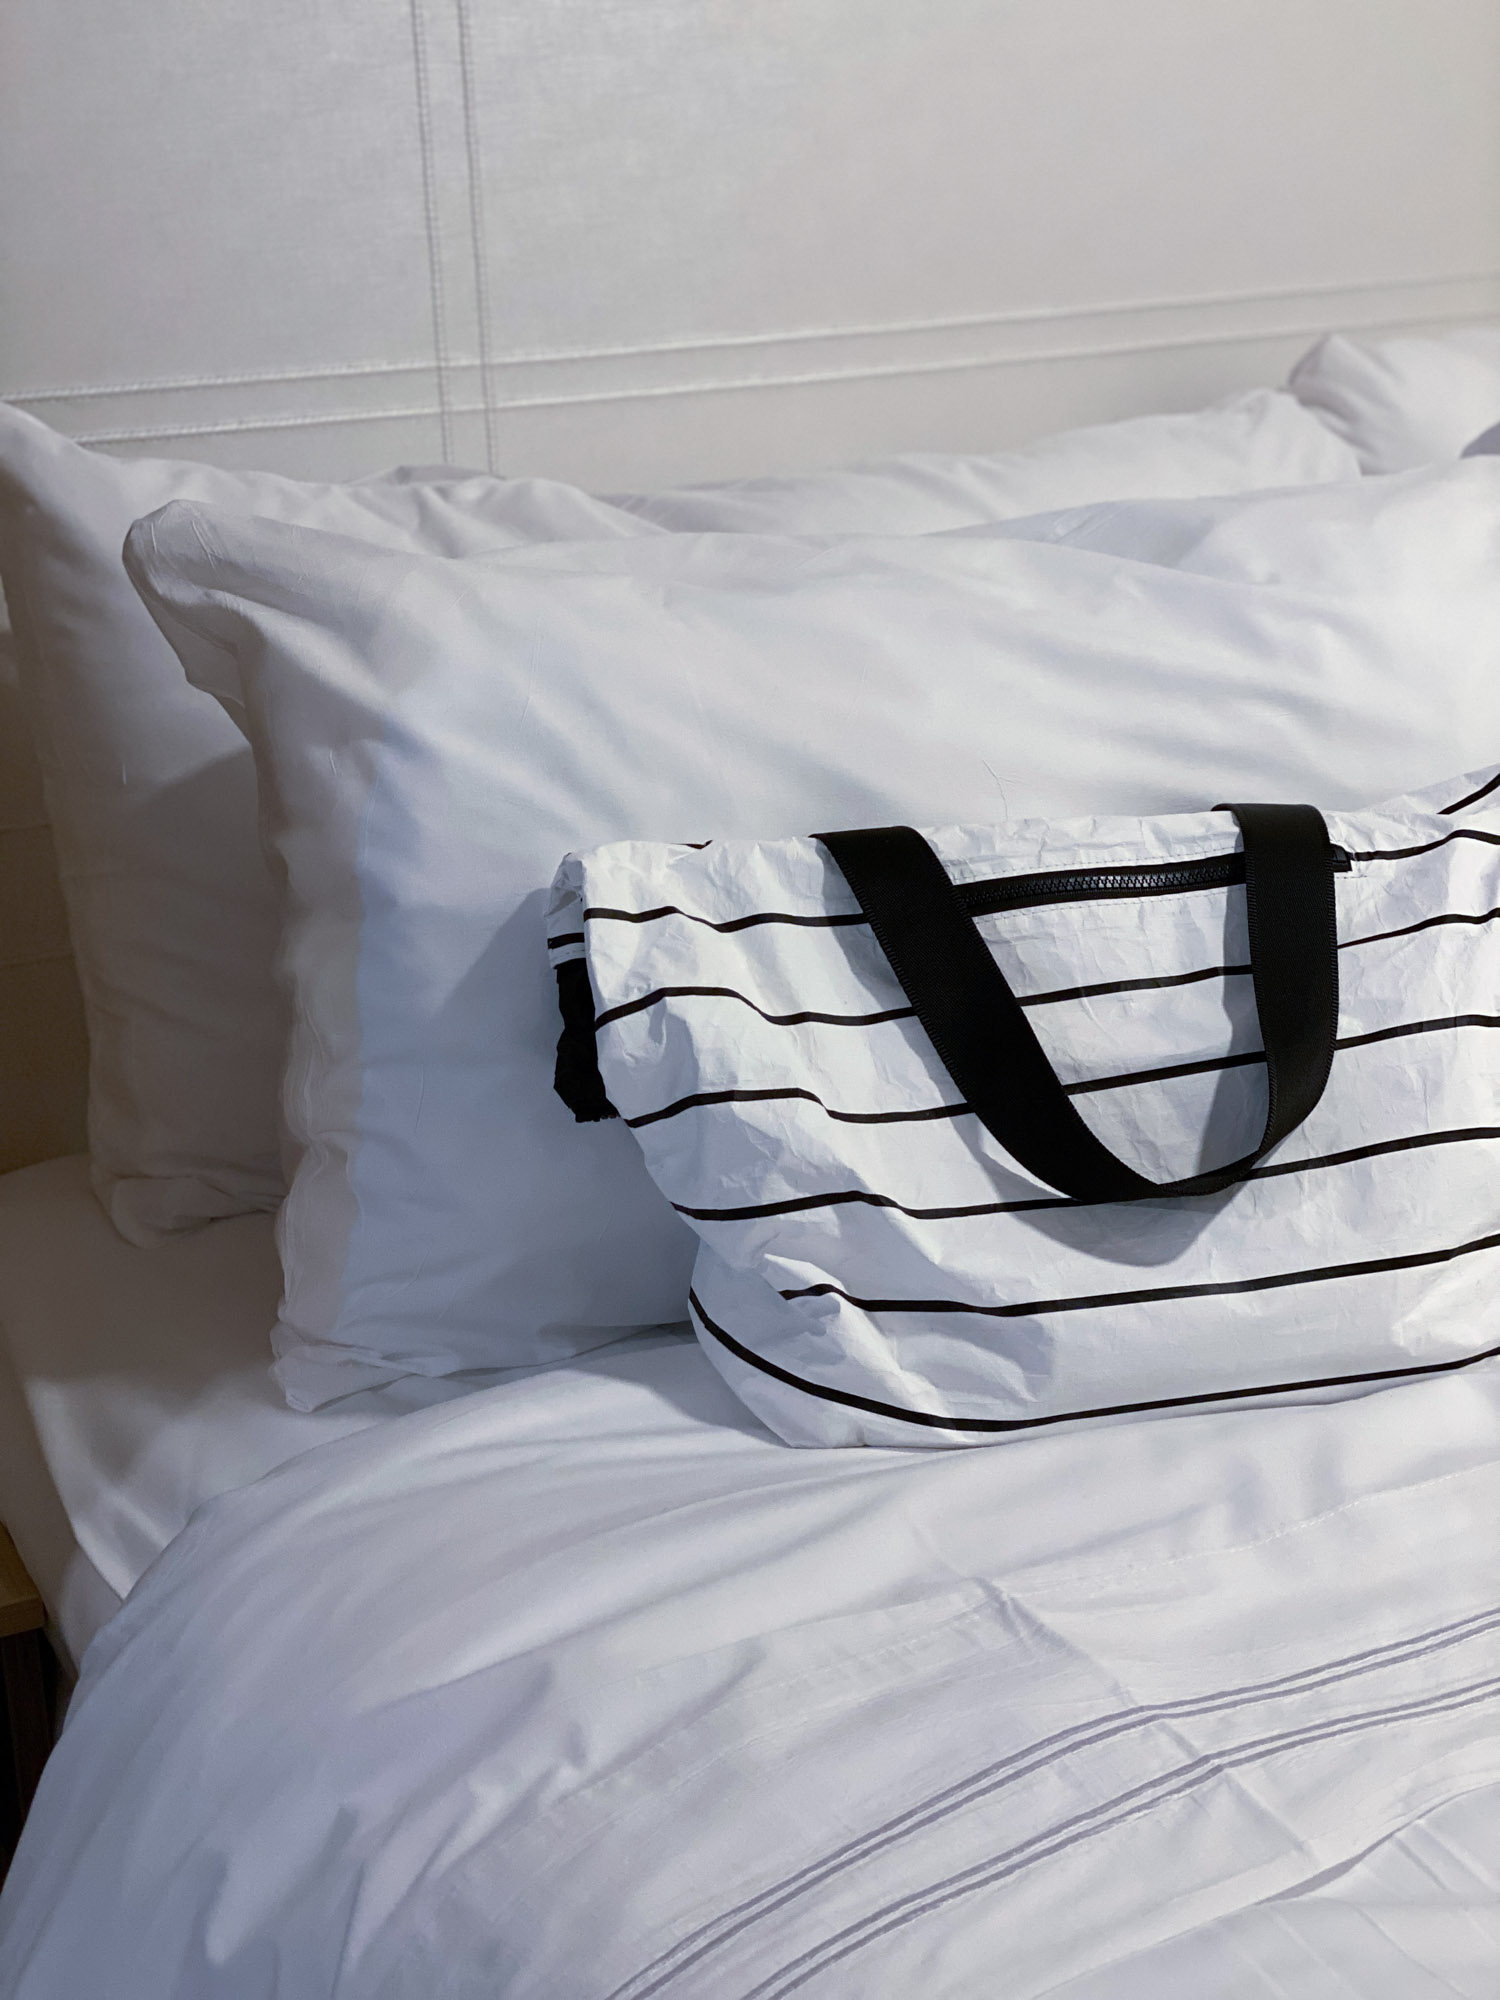 White beach bag on bed with white bedding